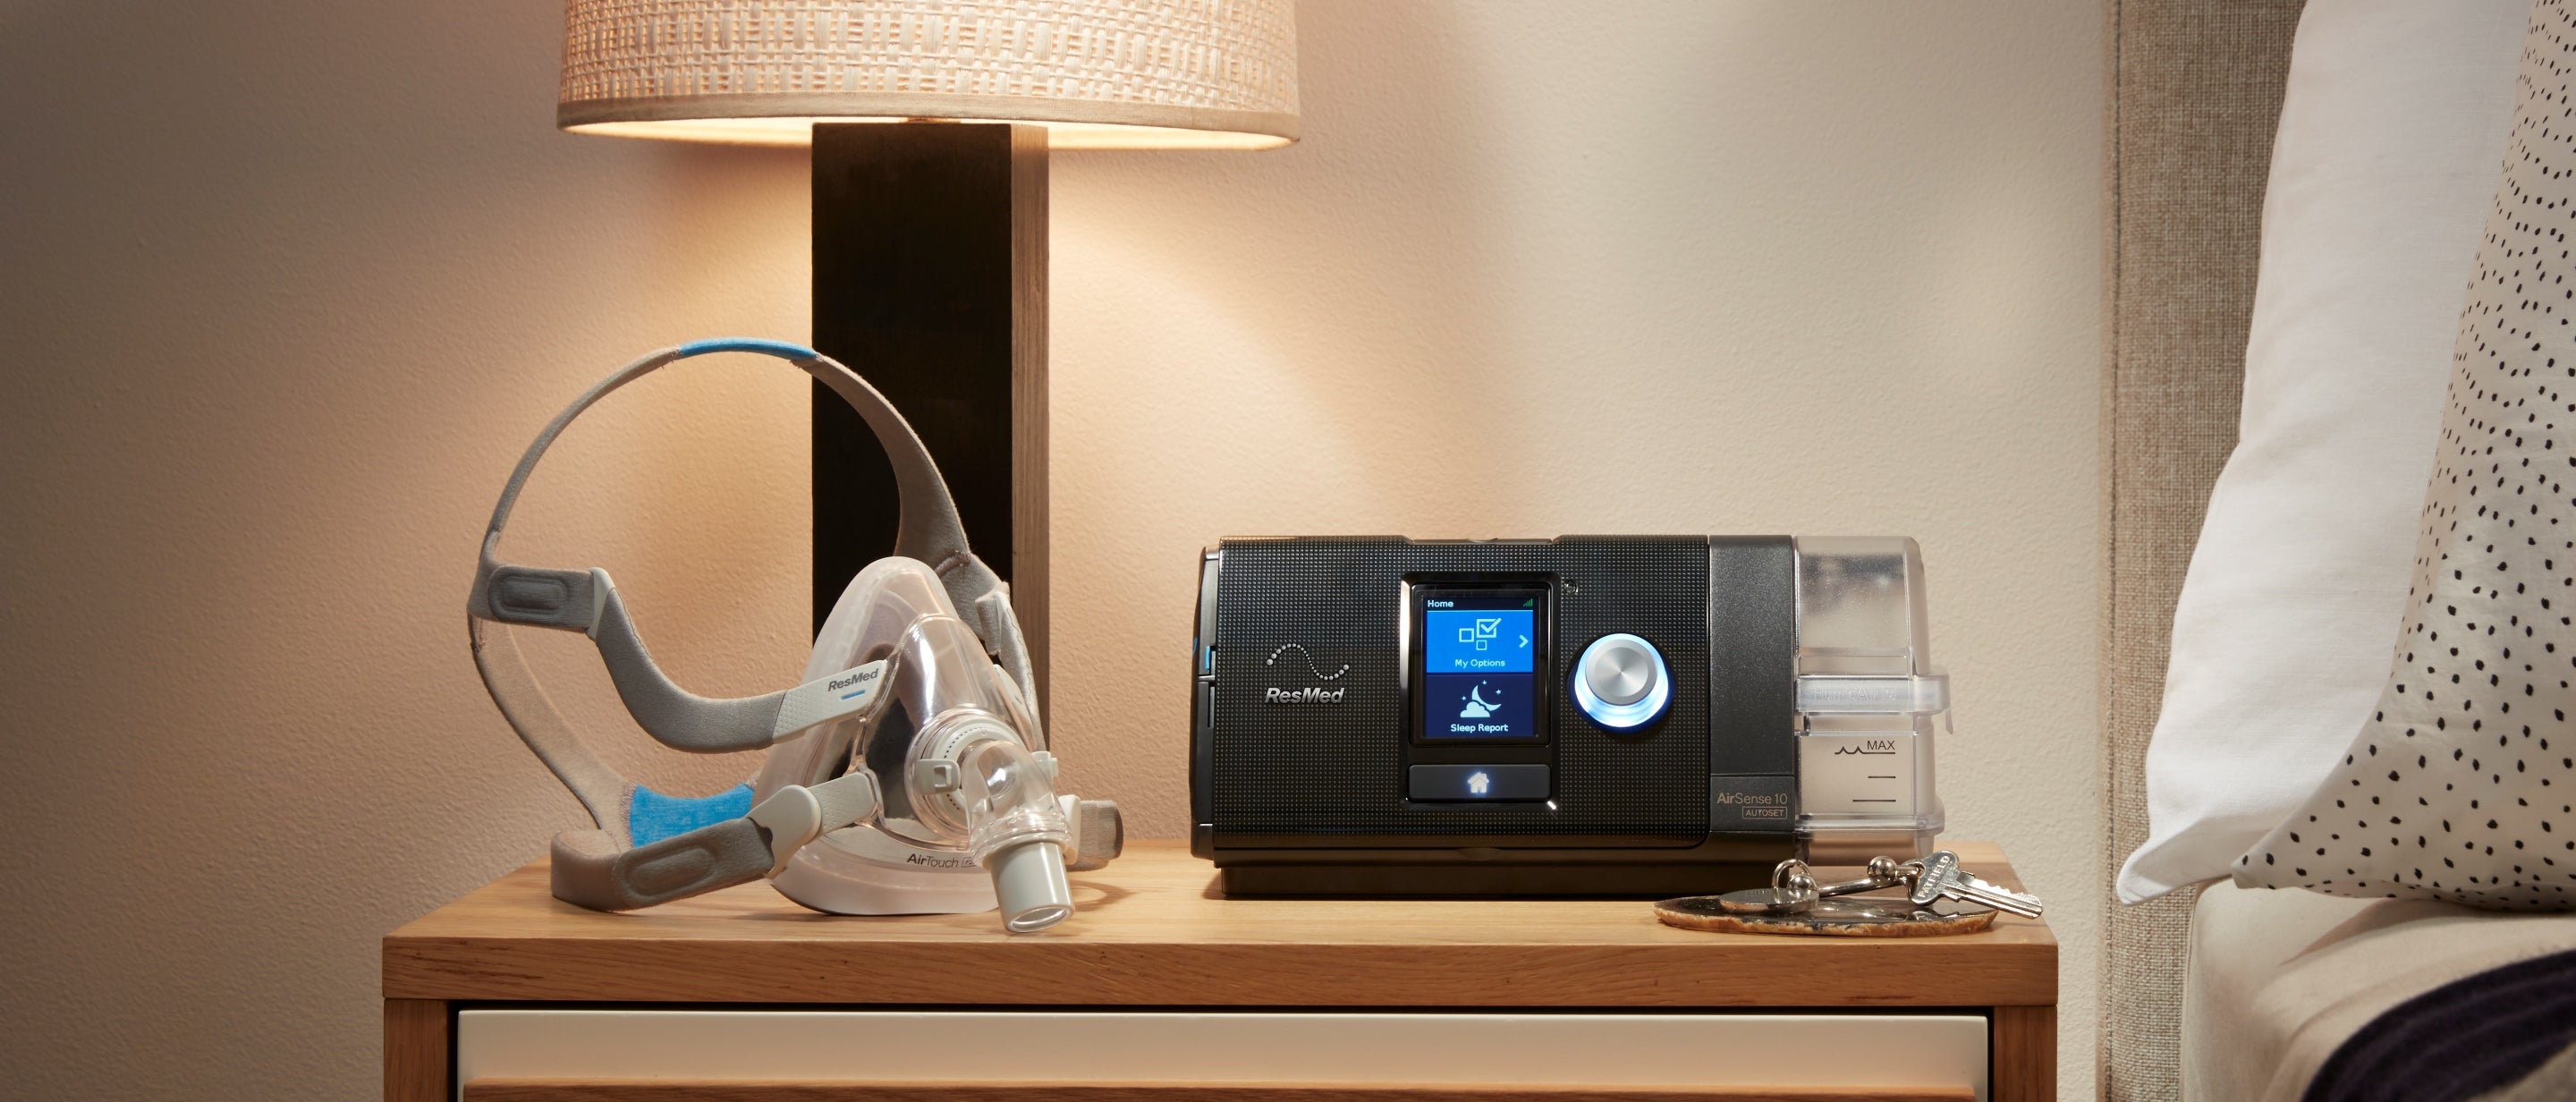 Bedside table with a ResMed AirFit F20 CPAP Mask and ResMed AirSense 10 AutoSet CPAP Machine on top